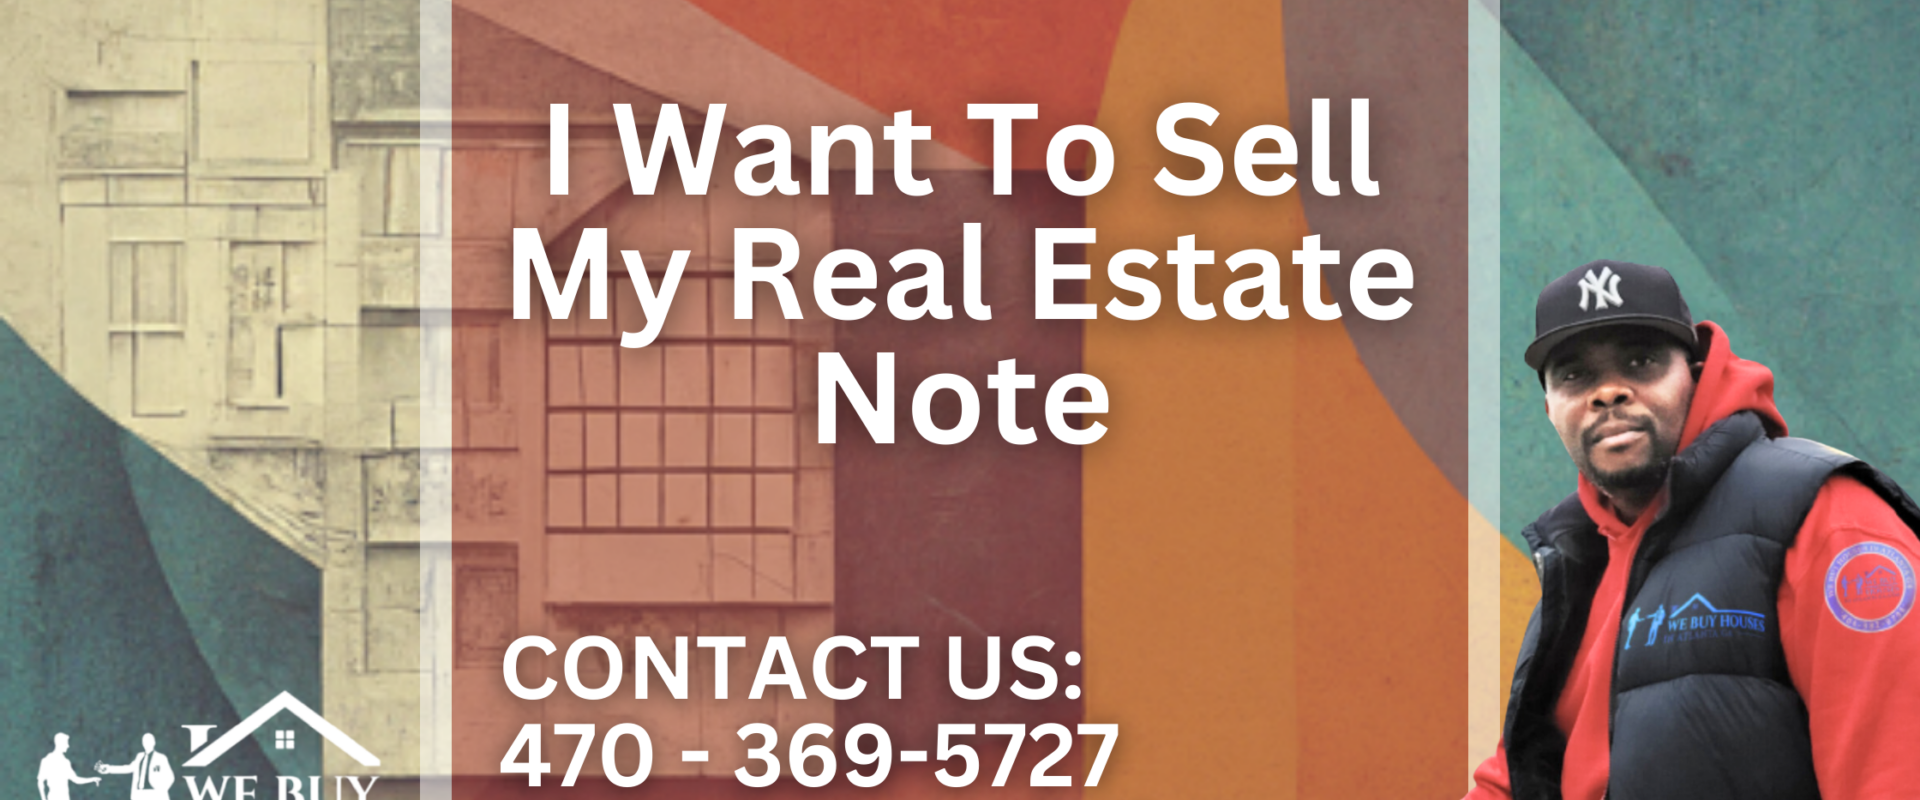 I Want To Sell My Real Estate Note